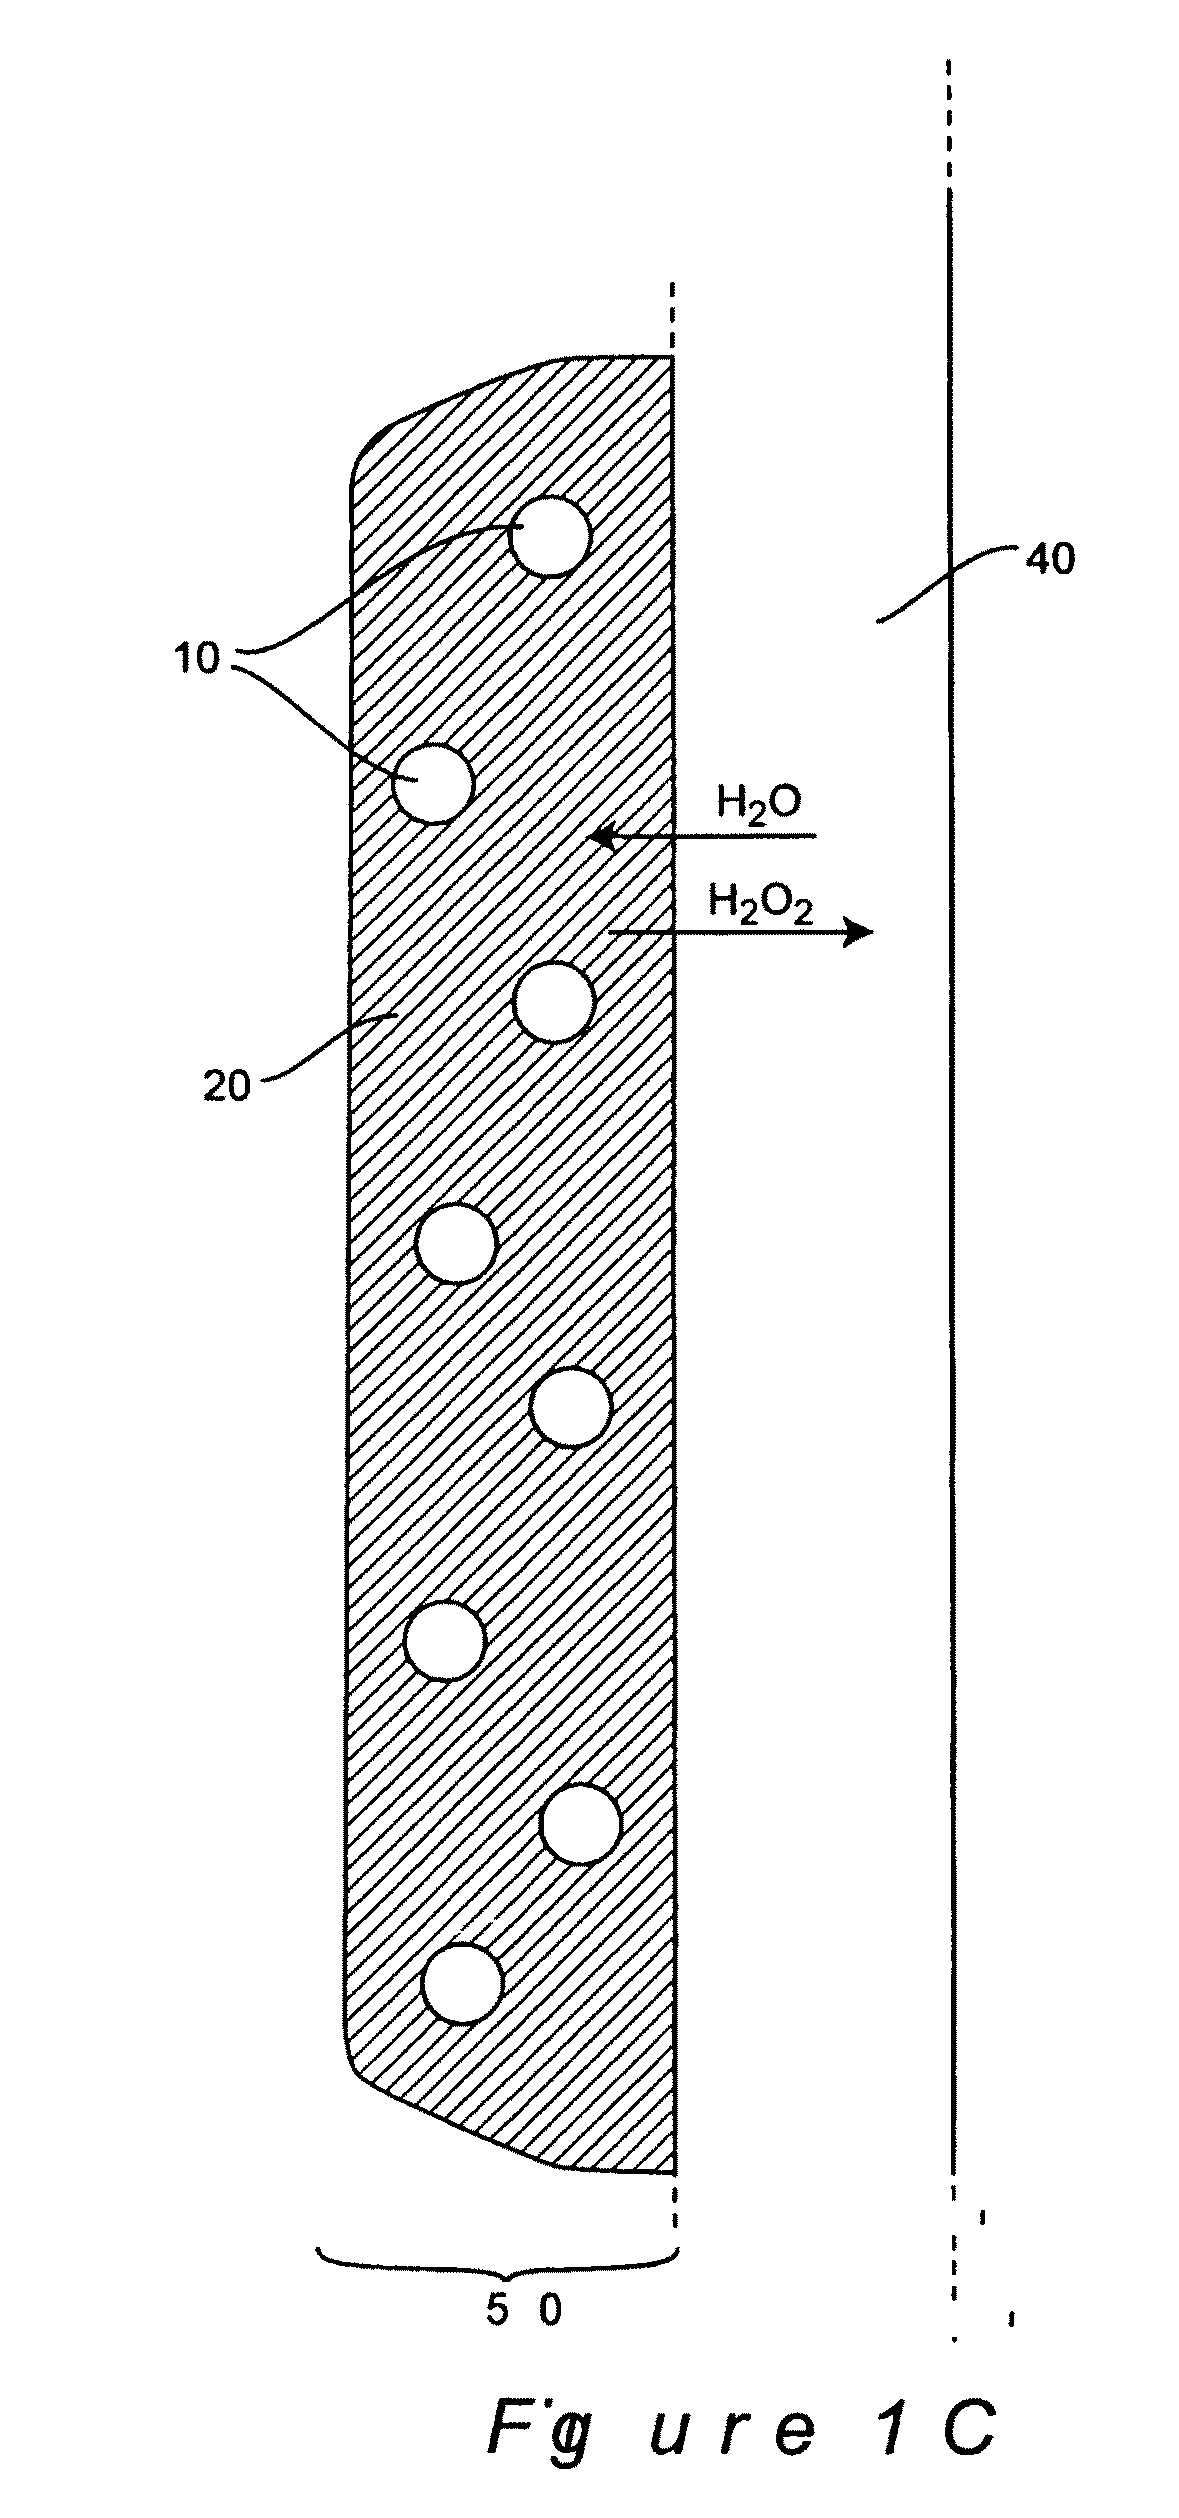 Methods and Compositions for Controlled and Sustained Production and Delivery of Peroxides and/or Oxygen for Biological and Industrial Applications